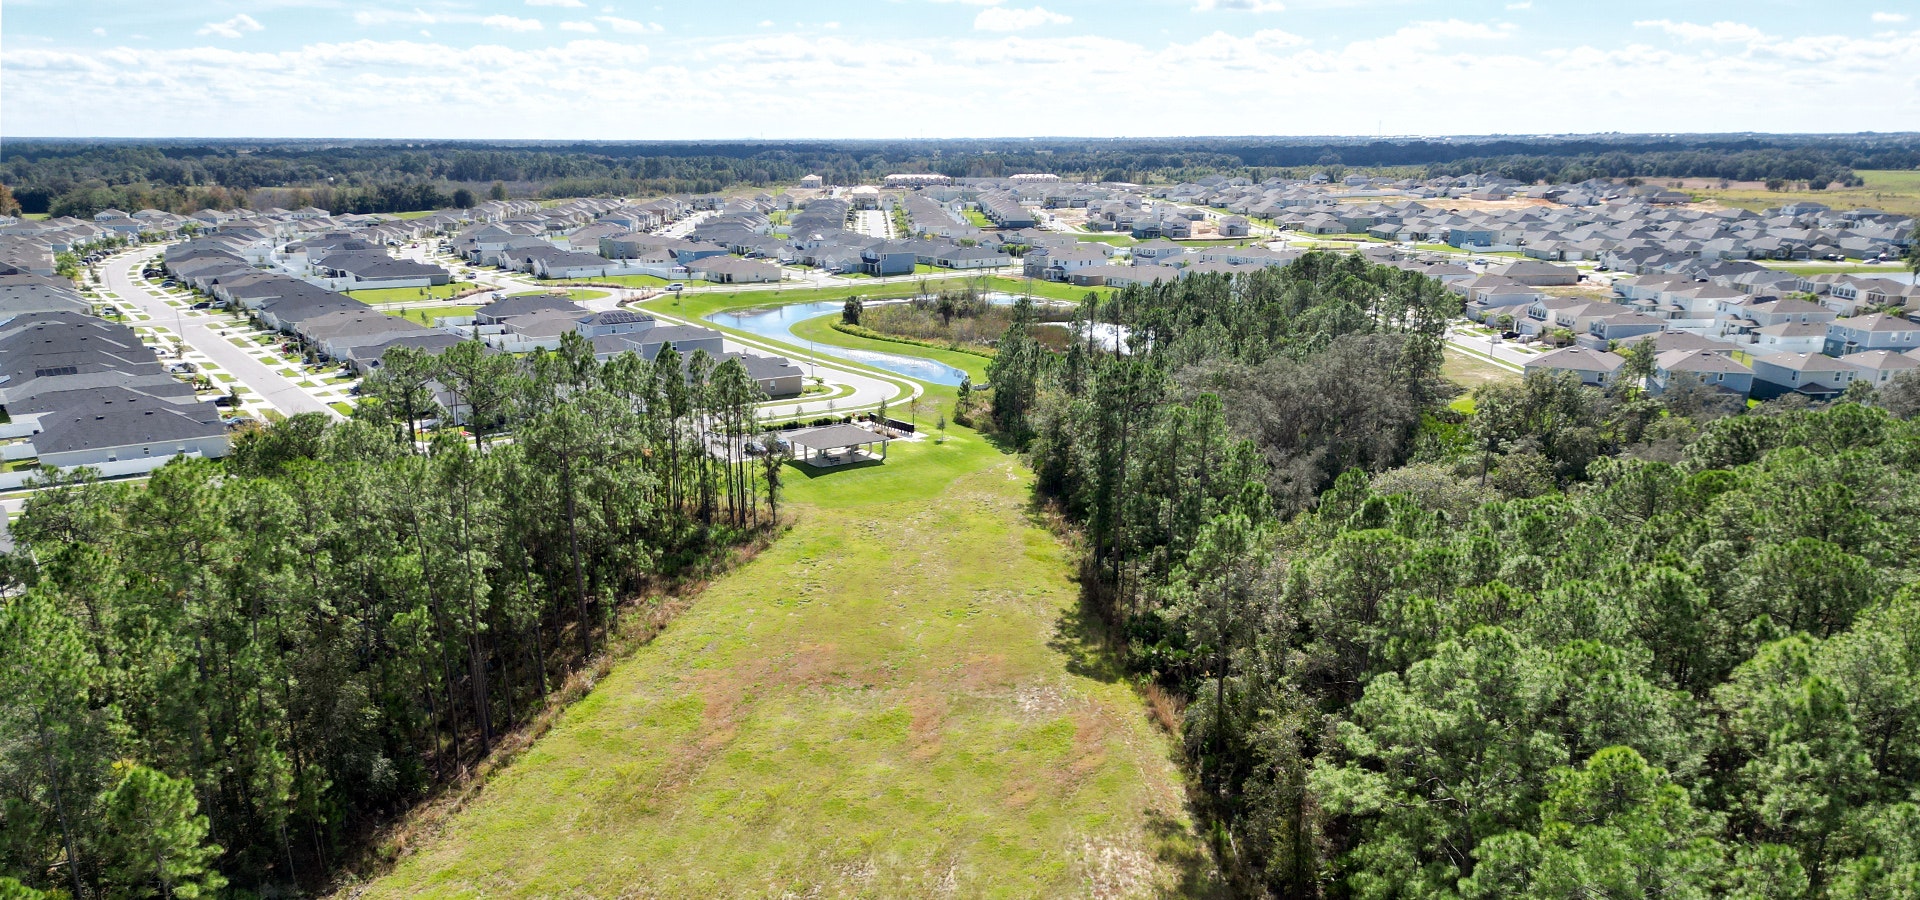 Astonia, a community of new homes in Davenport, FL